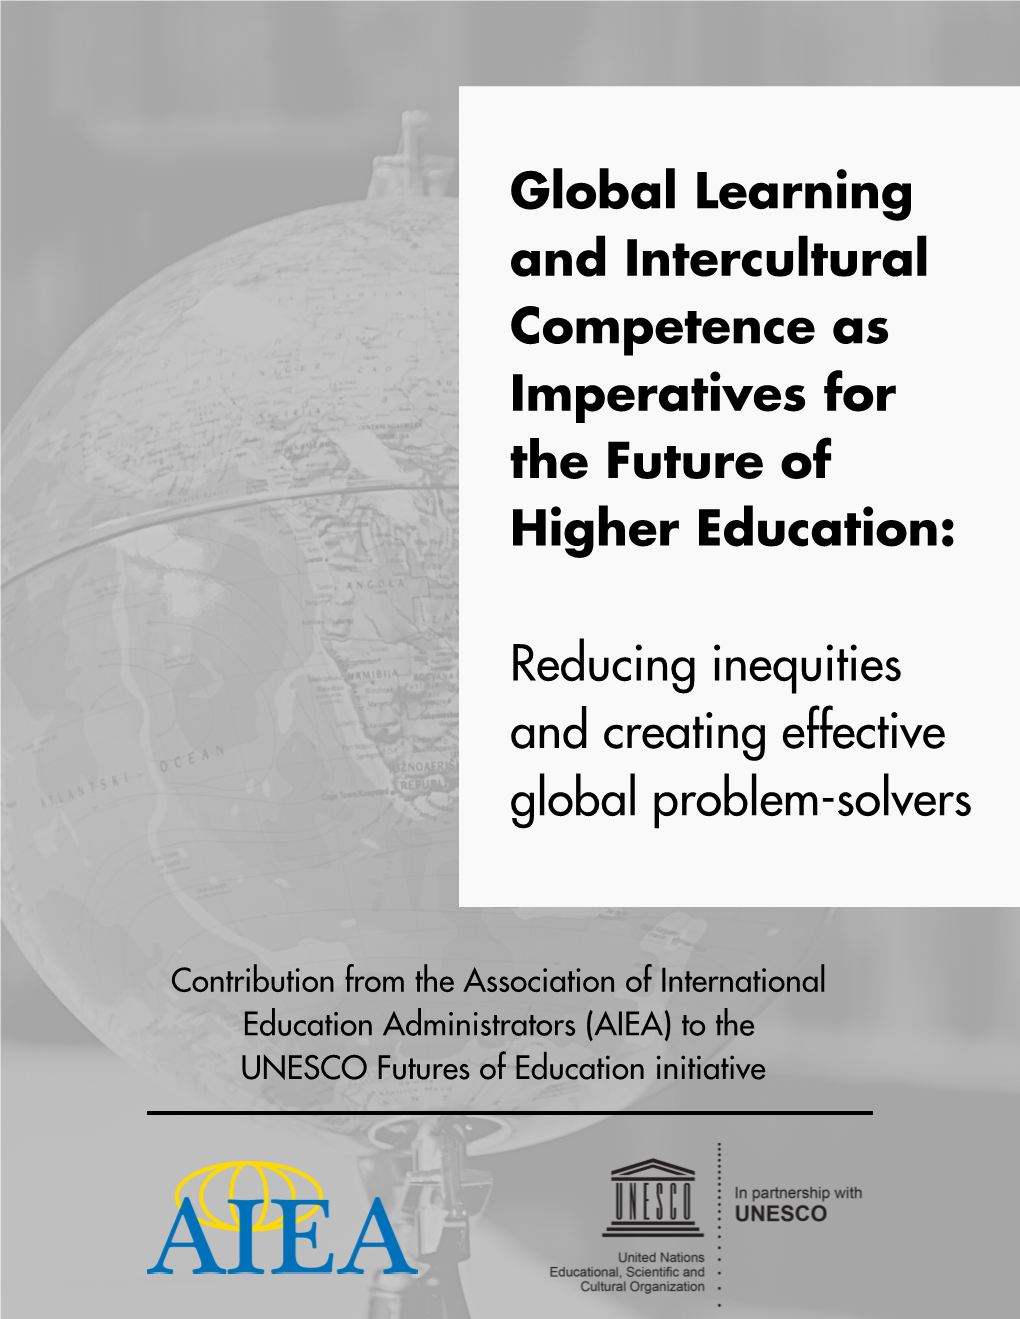 Global Learning and Intercultural Competence As Imperatives for the Future of Higher Education